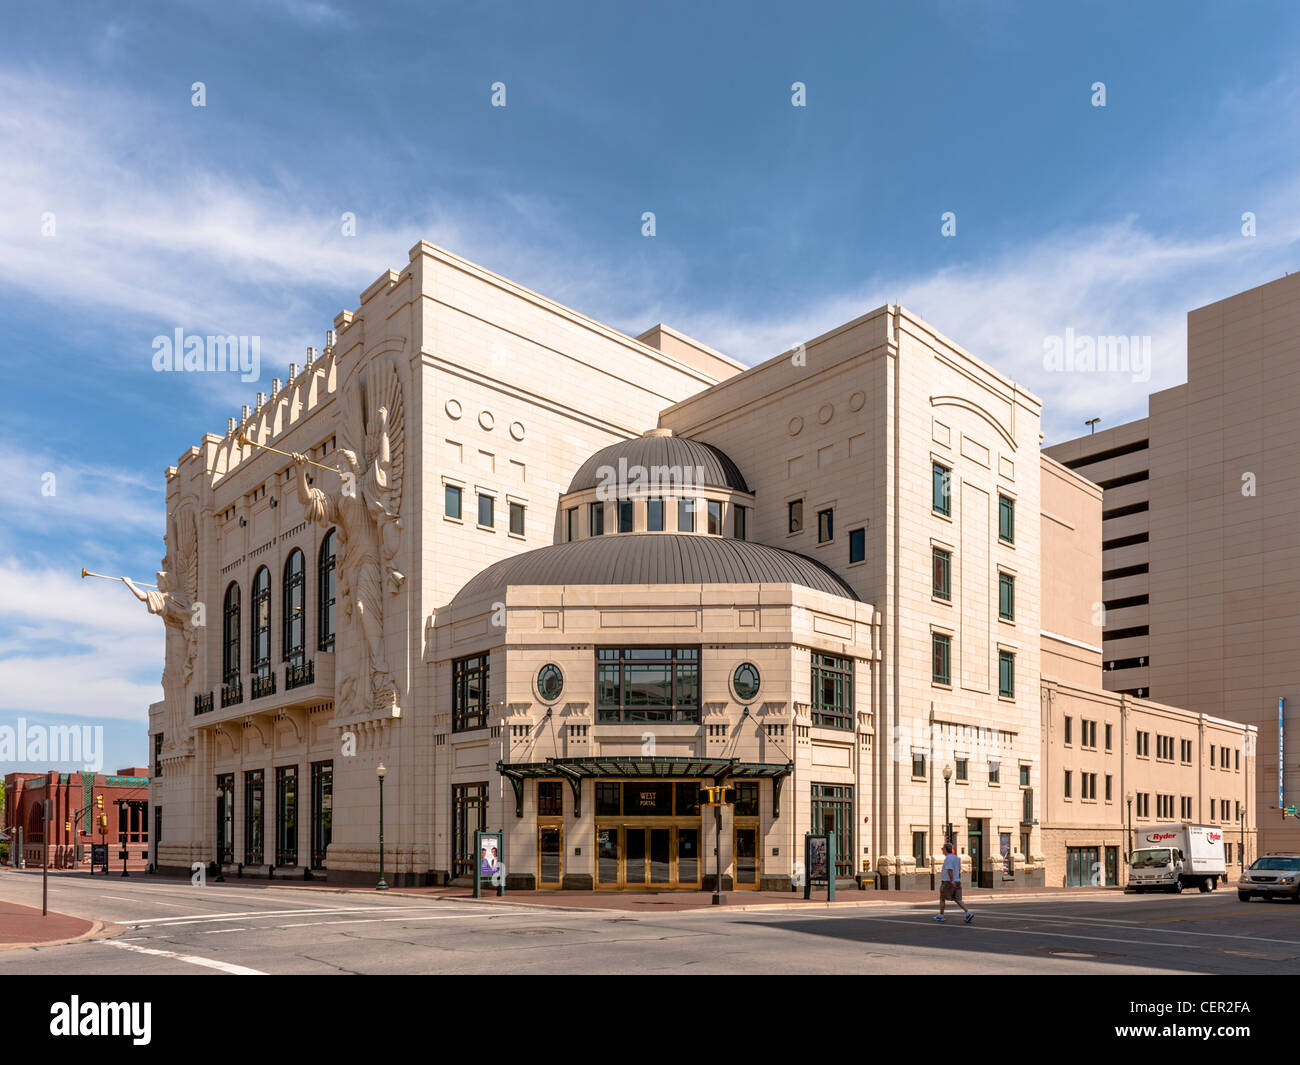 Nancy Lee Perry R. Bass Performance Hall, Fort Worth Stockfoto